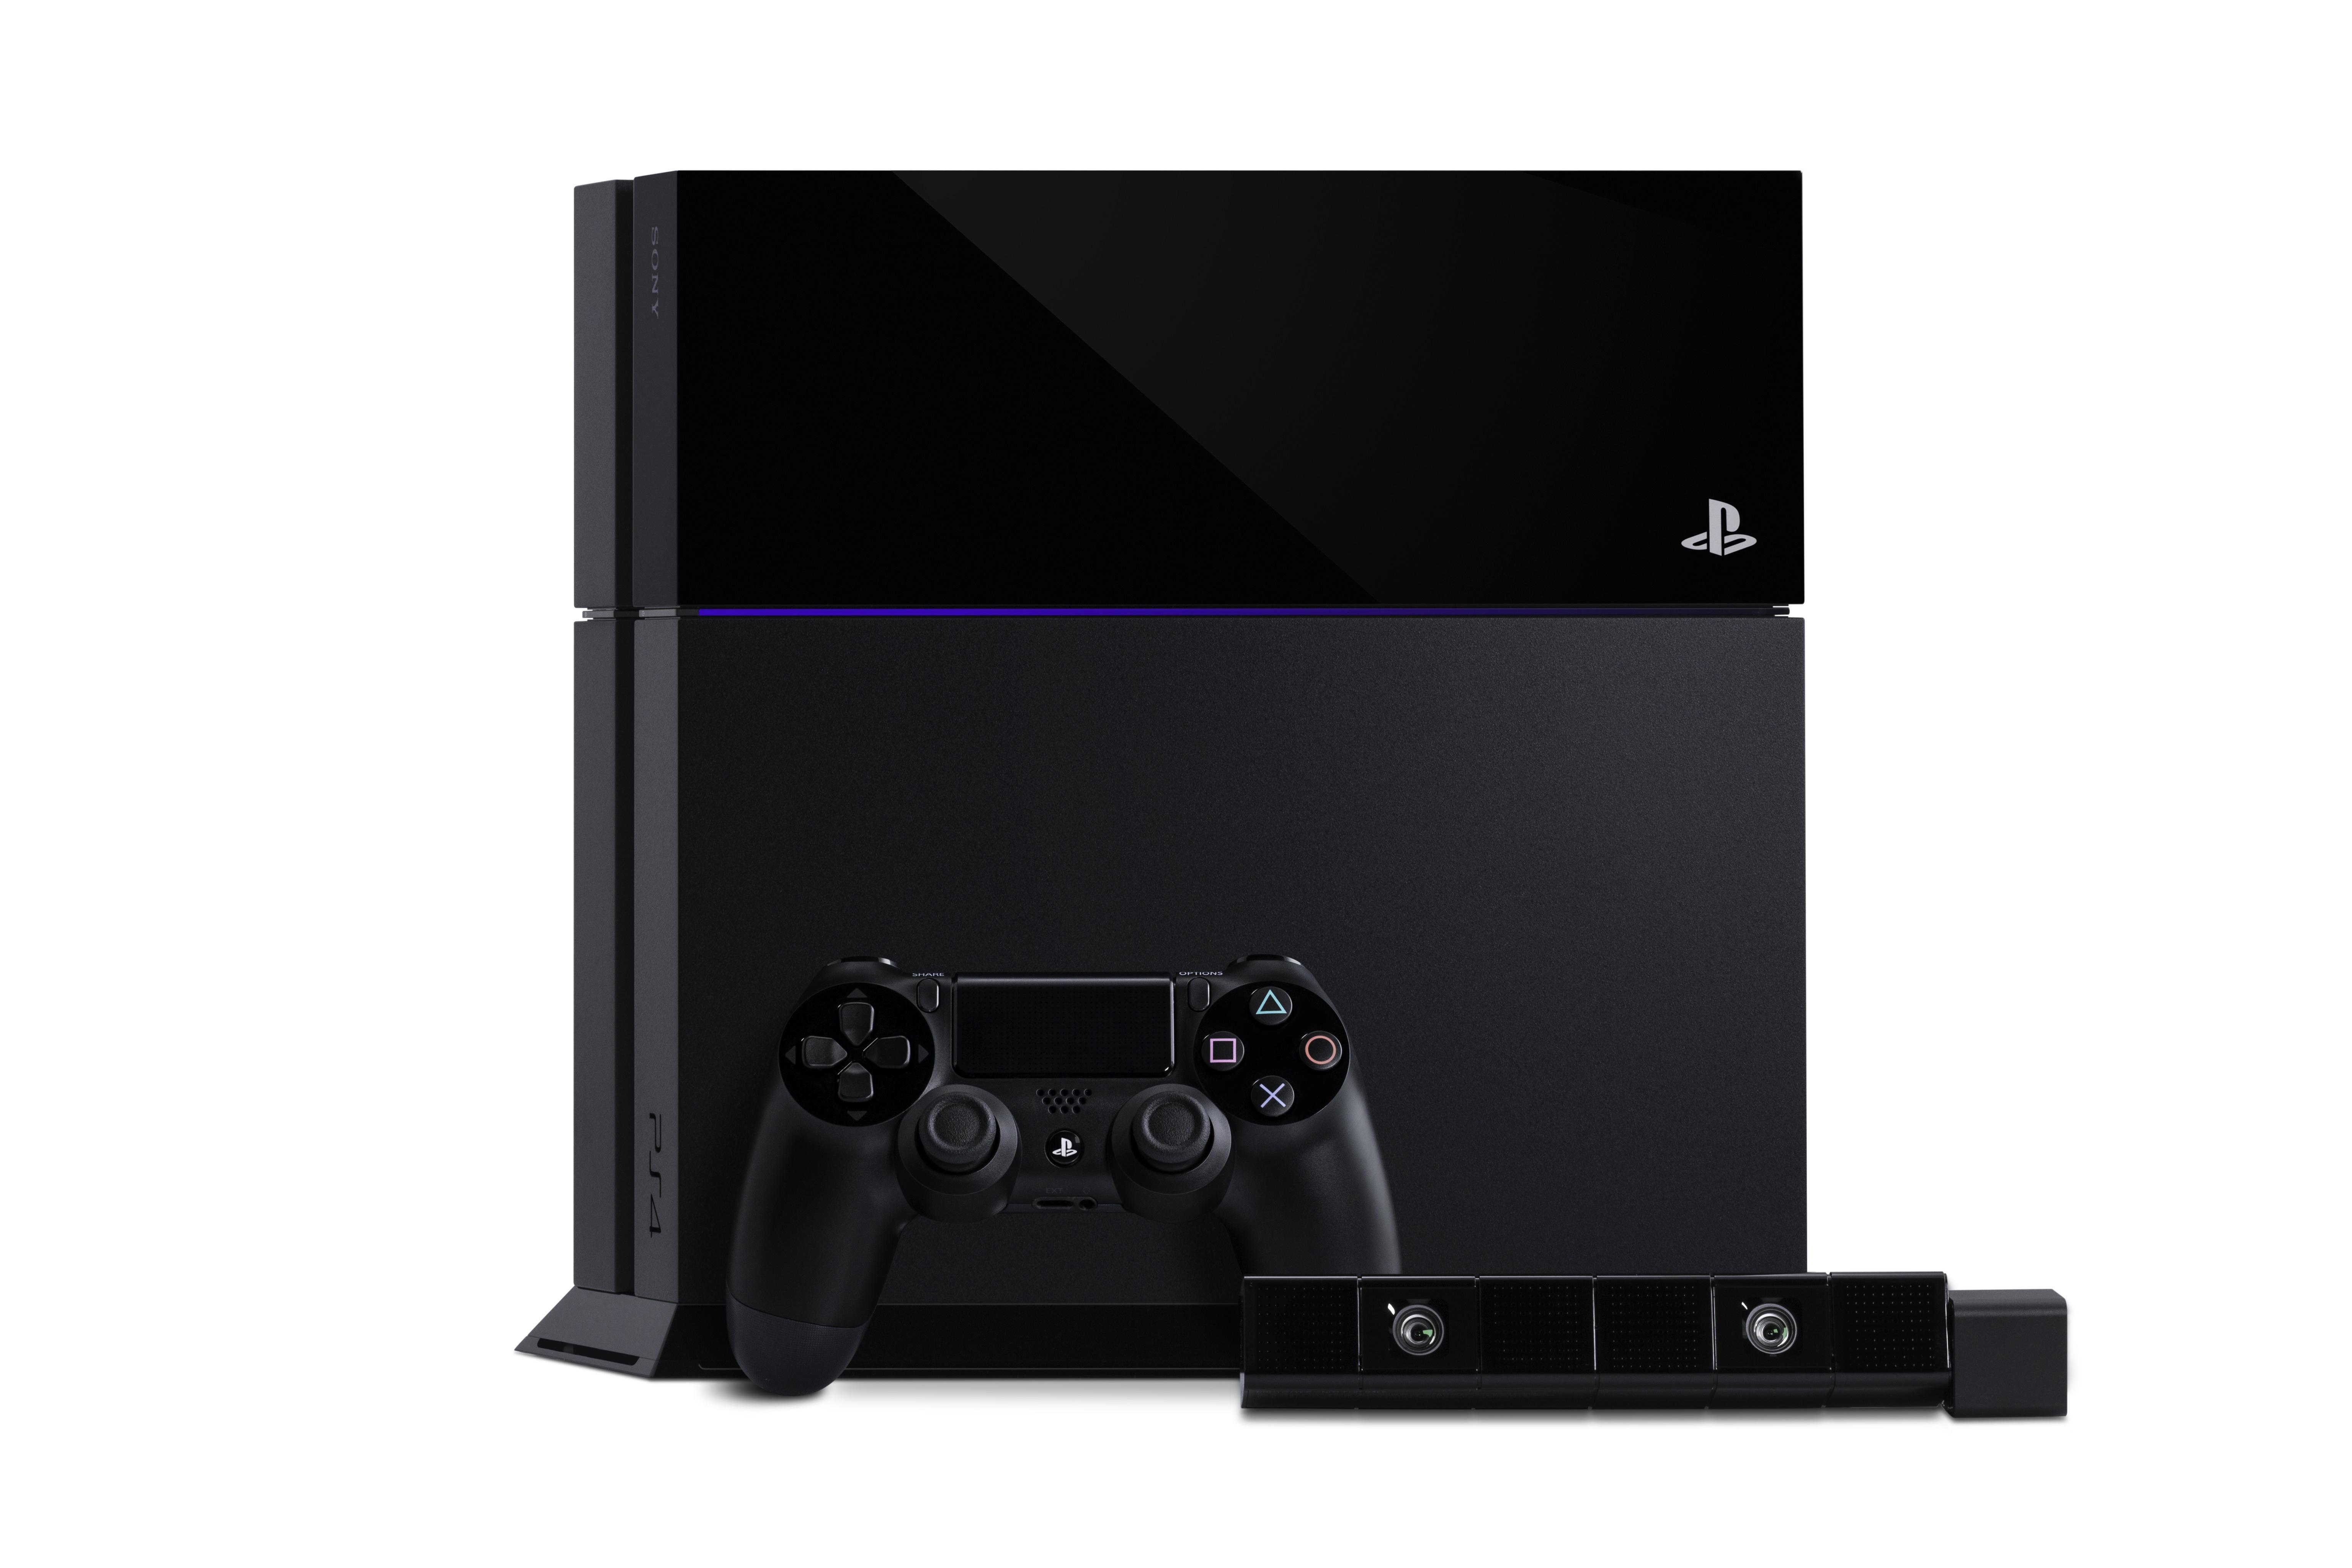 Ps4 общее. Сони ПС 4. Sony 4 Pro. Sony 2013 PLAYSTATION 4. PLAYSTATION 4 Console.